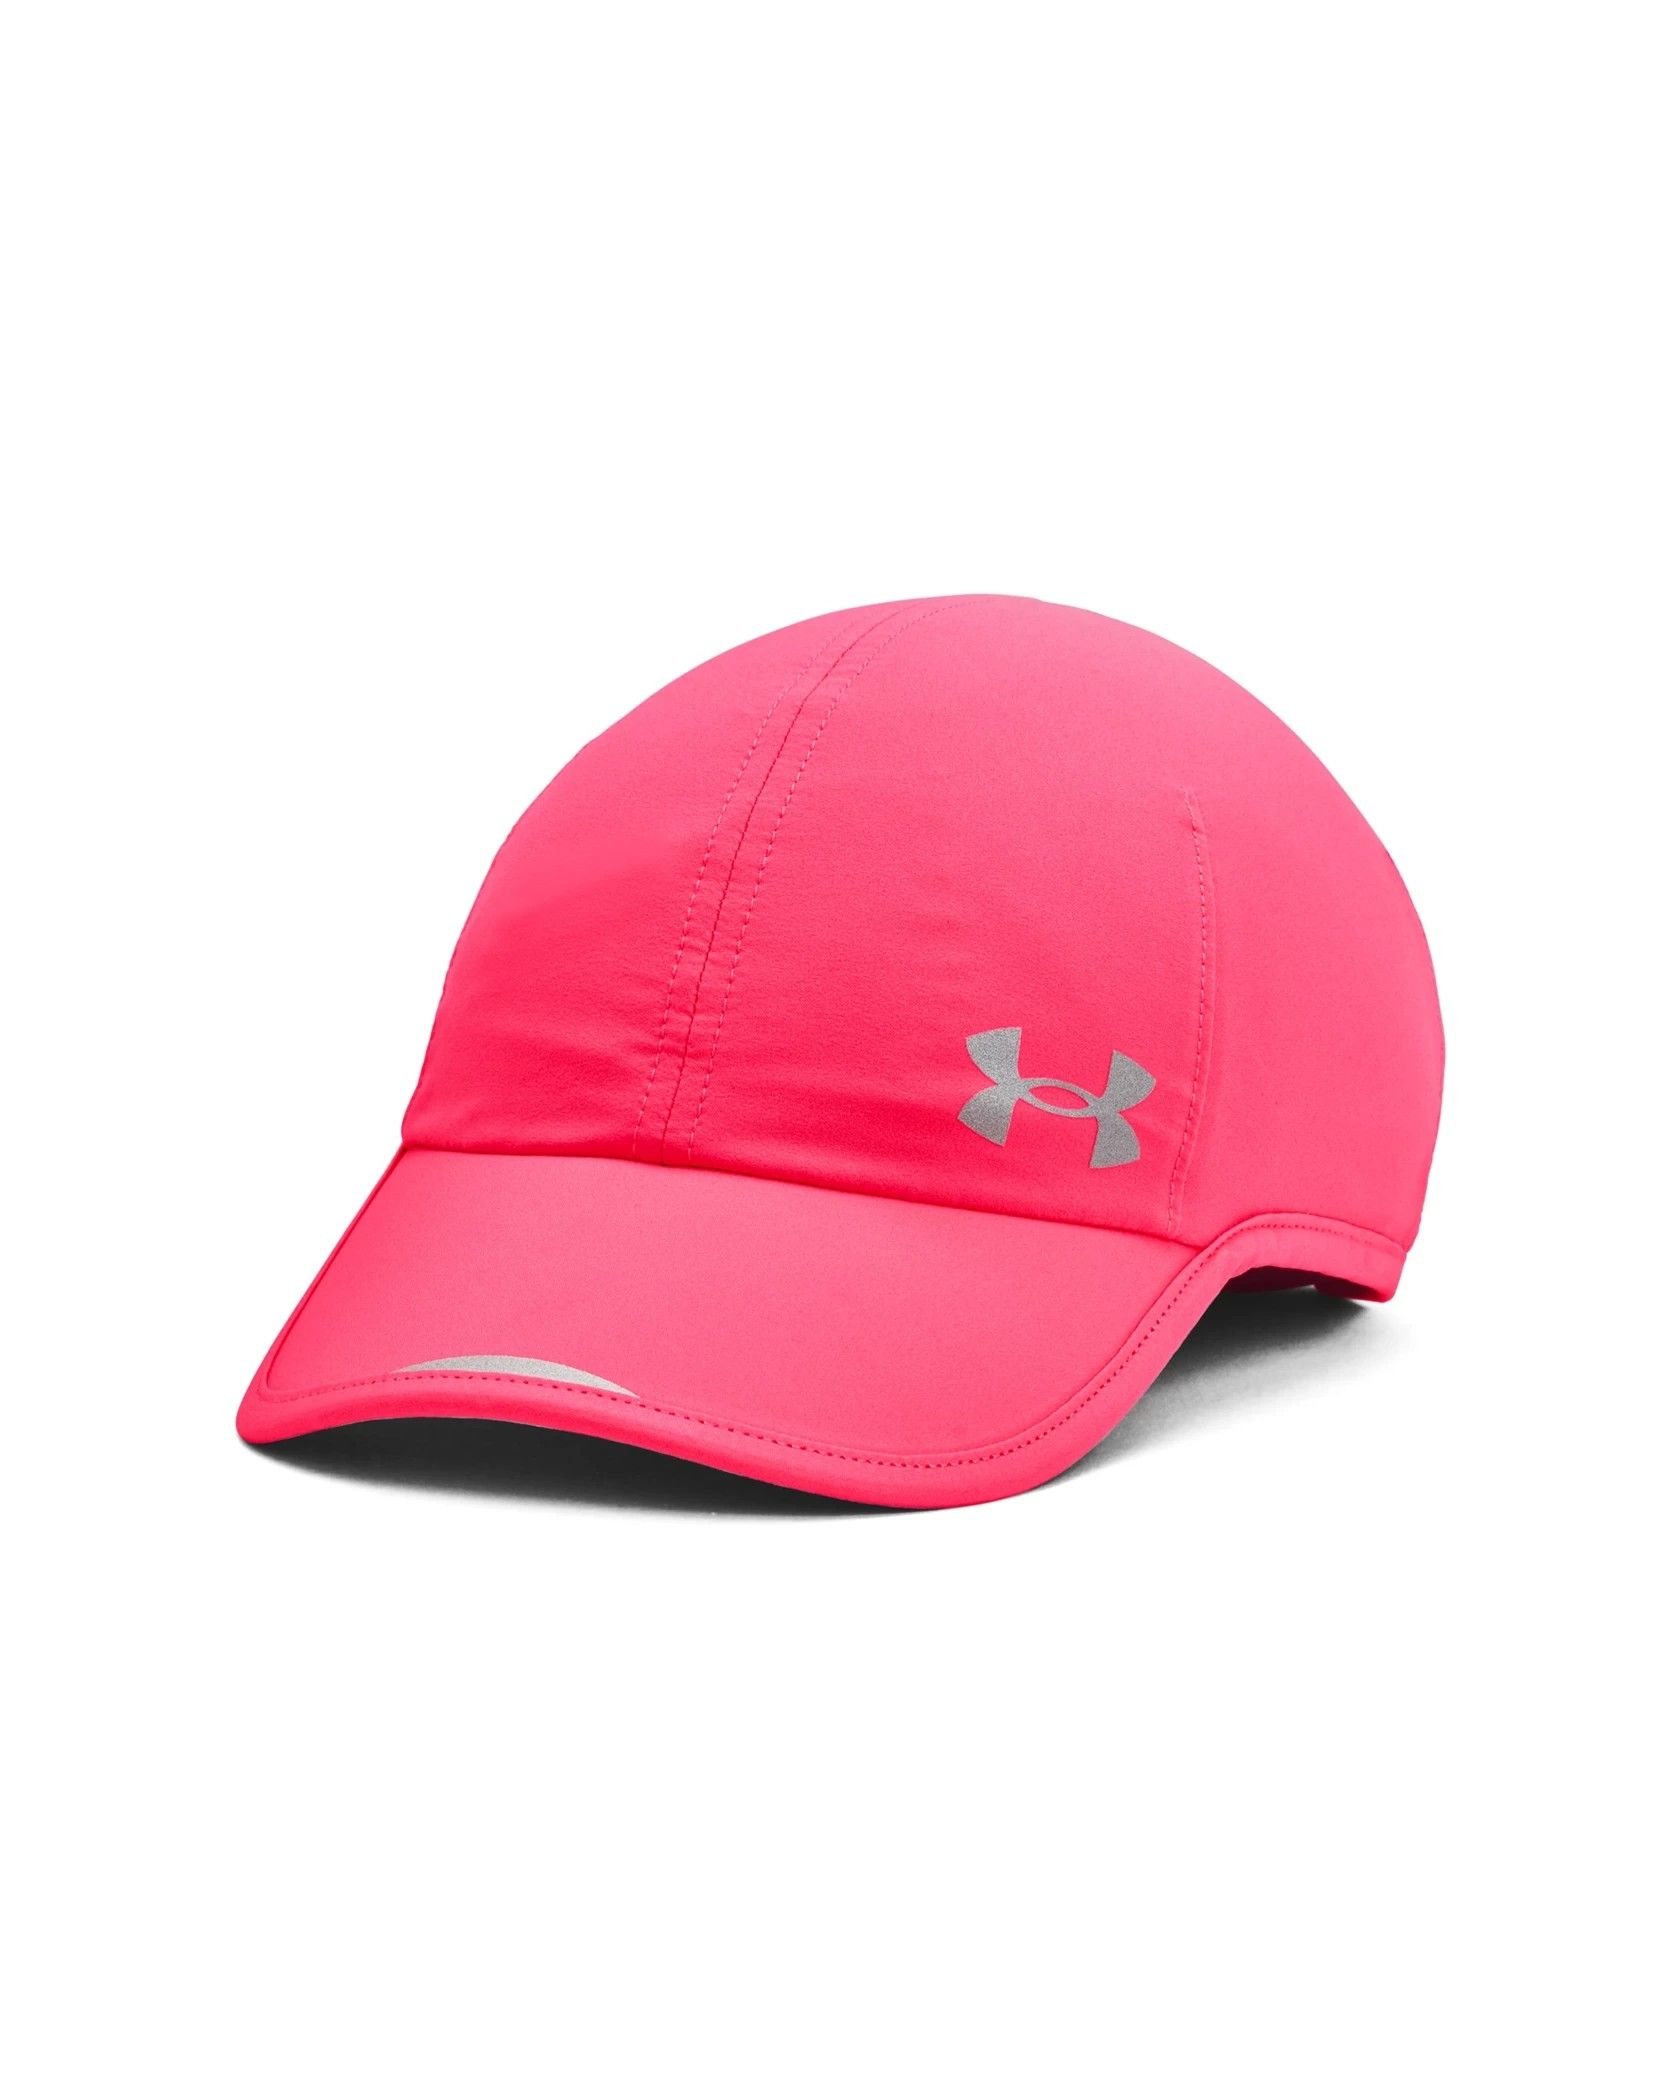 UNDER ARMOUR Women Printed Isochill Launch Run Cap (Onesize) by Myntra